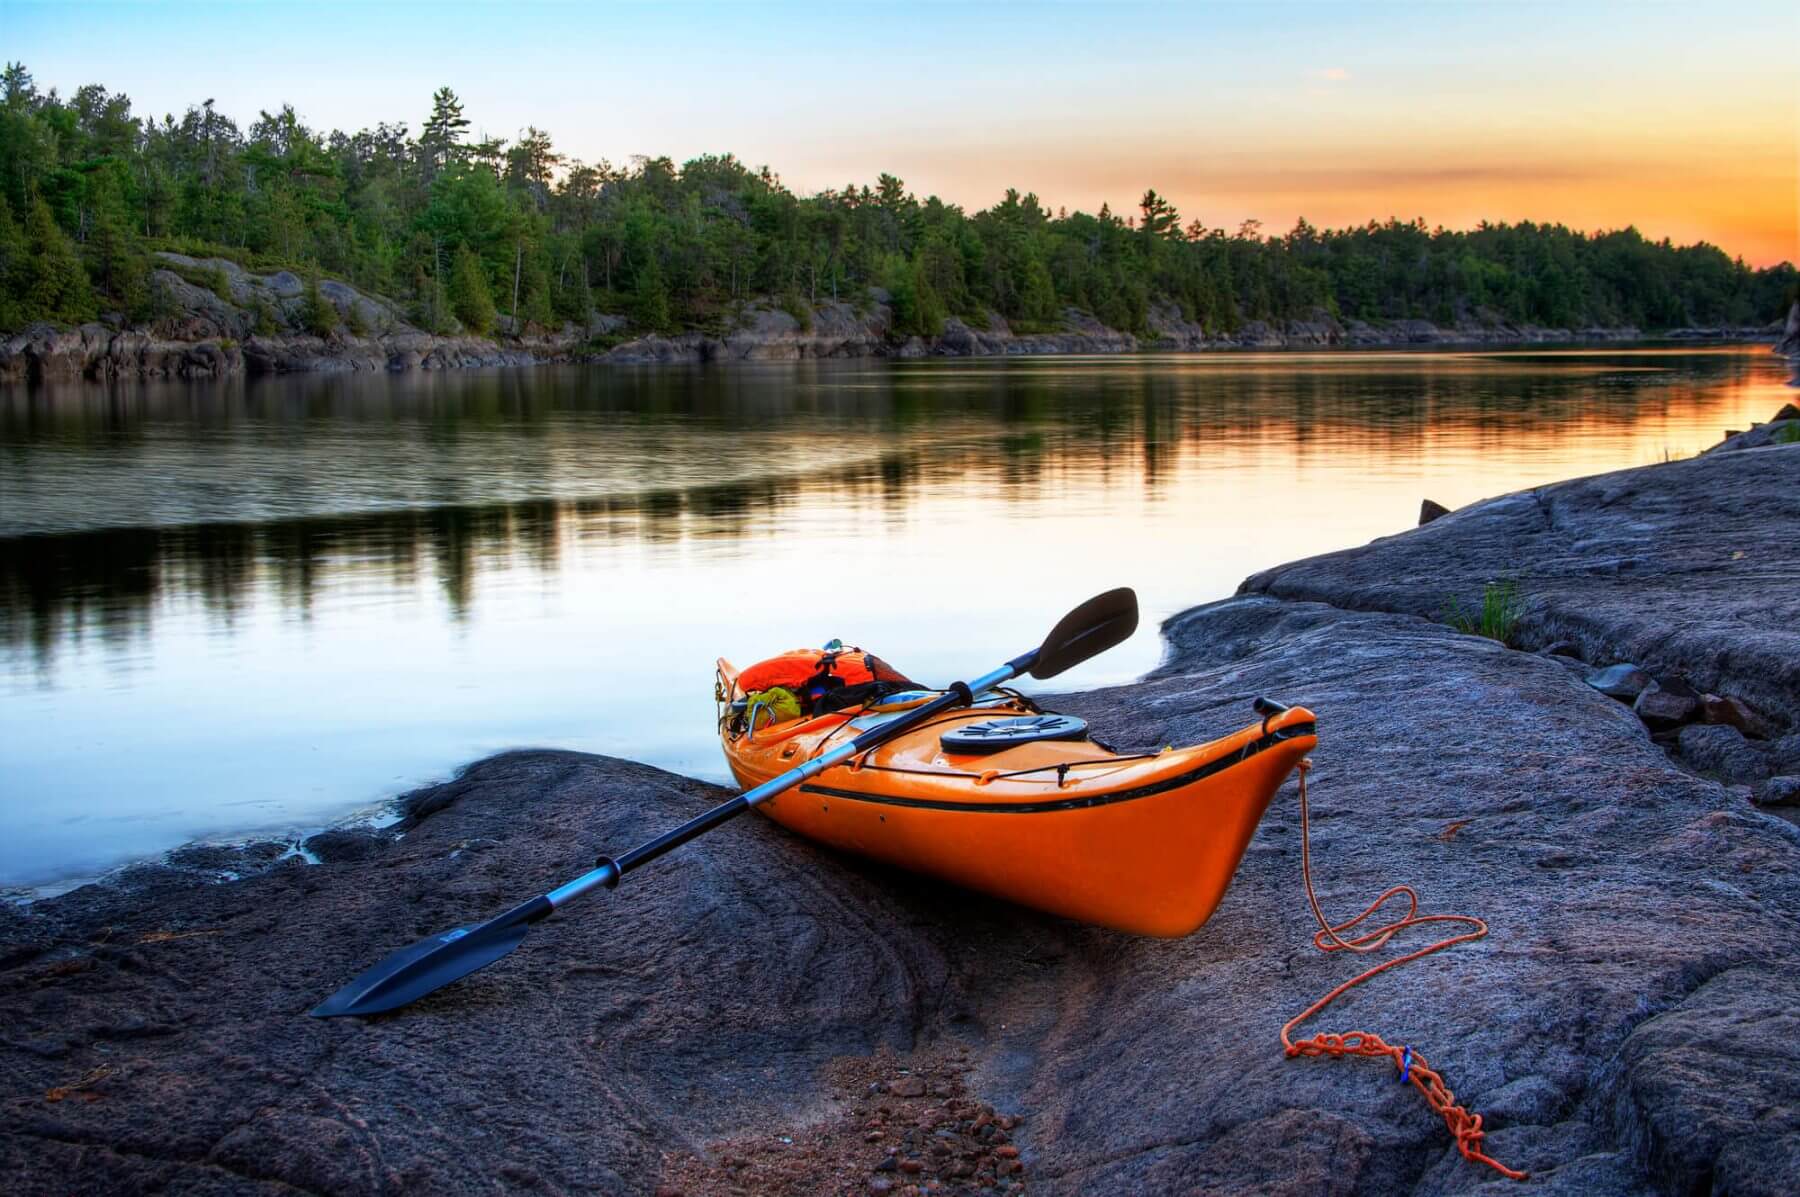 Wanna Kayak But Don't Know Where To Start? Let's Change That